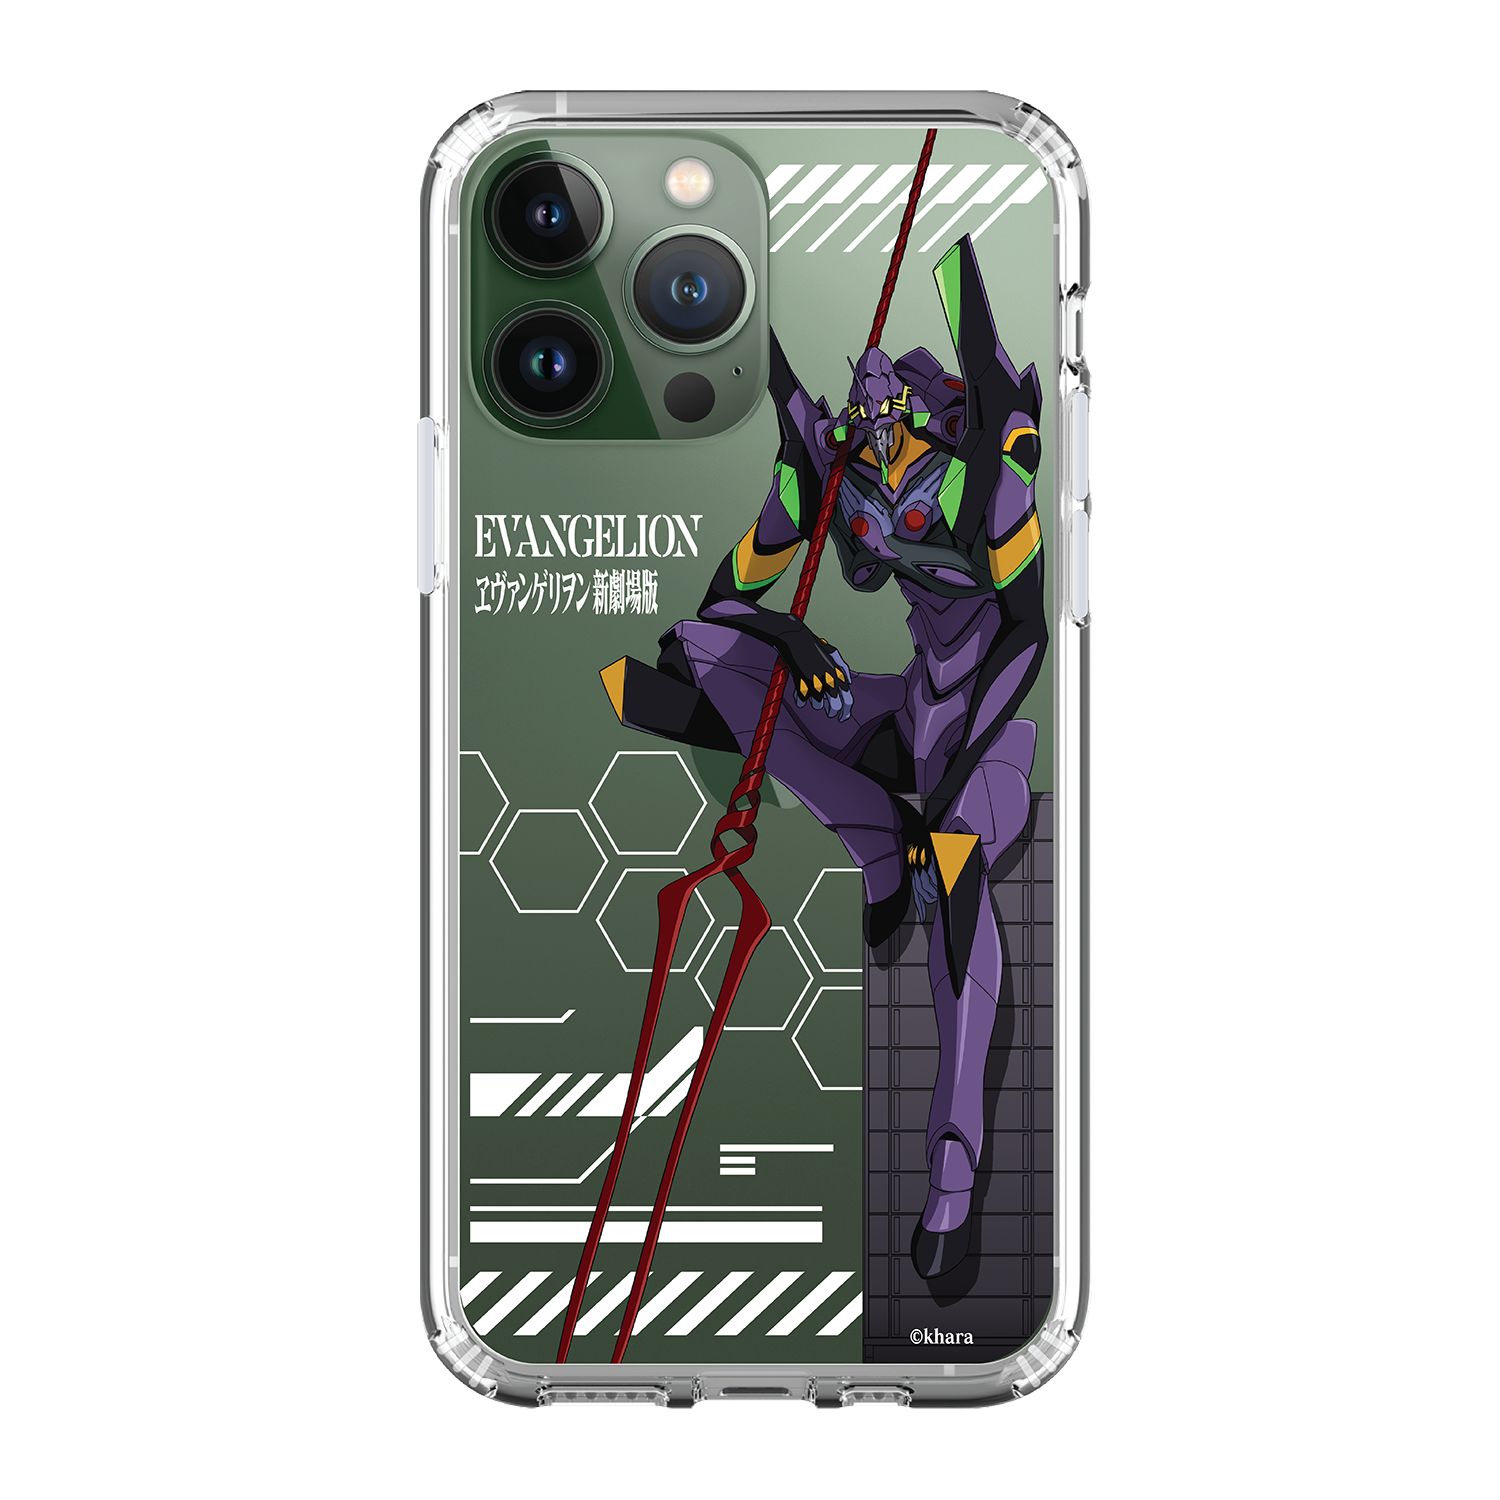 Evangelion Clear Case / iPhone Case / Android Case / Samsung Case  新世紀福音戰士 正版授權 全包邊氣囊防撞手機殼 (EVA-13)